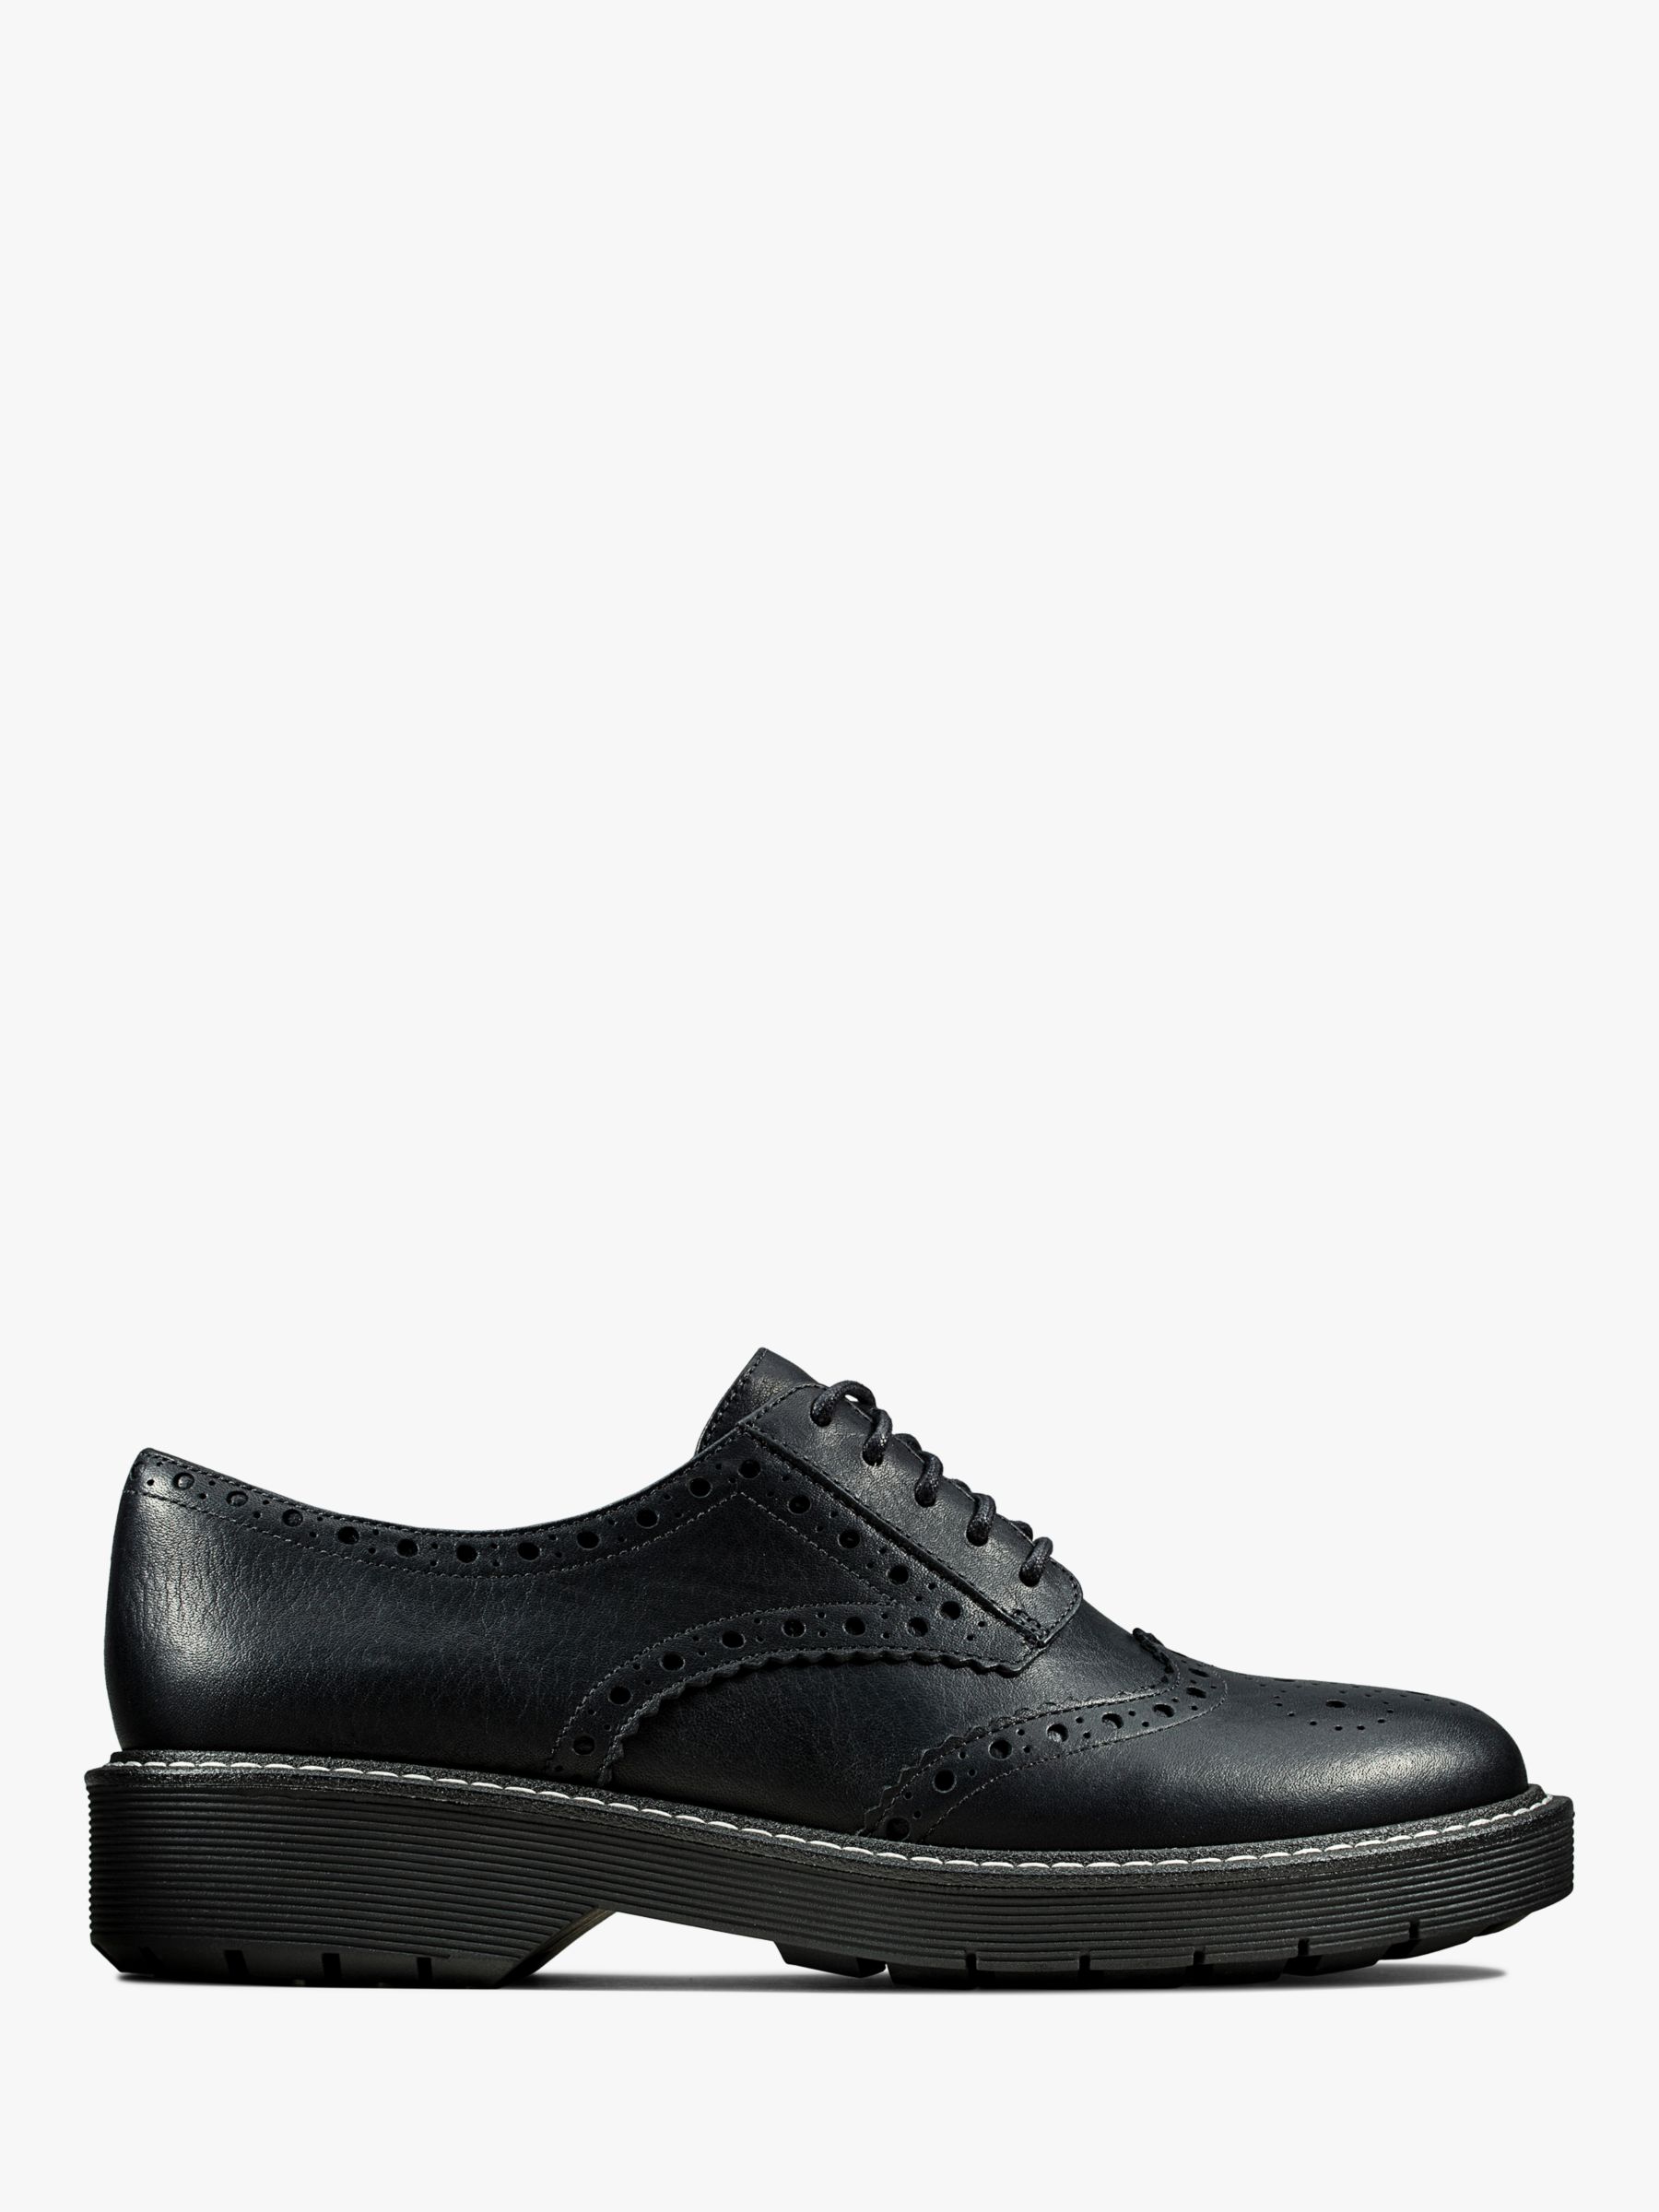 Clarks Witcombe Leather Brogues, Black